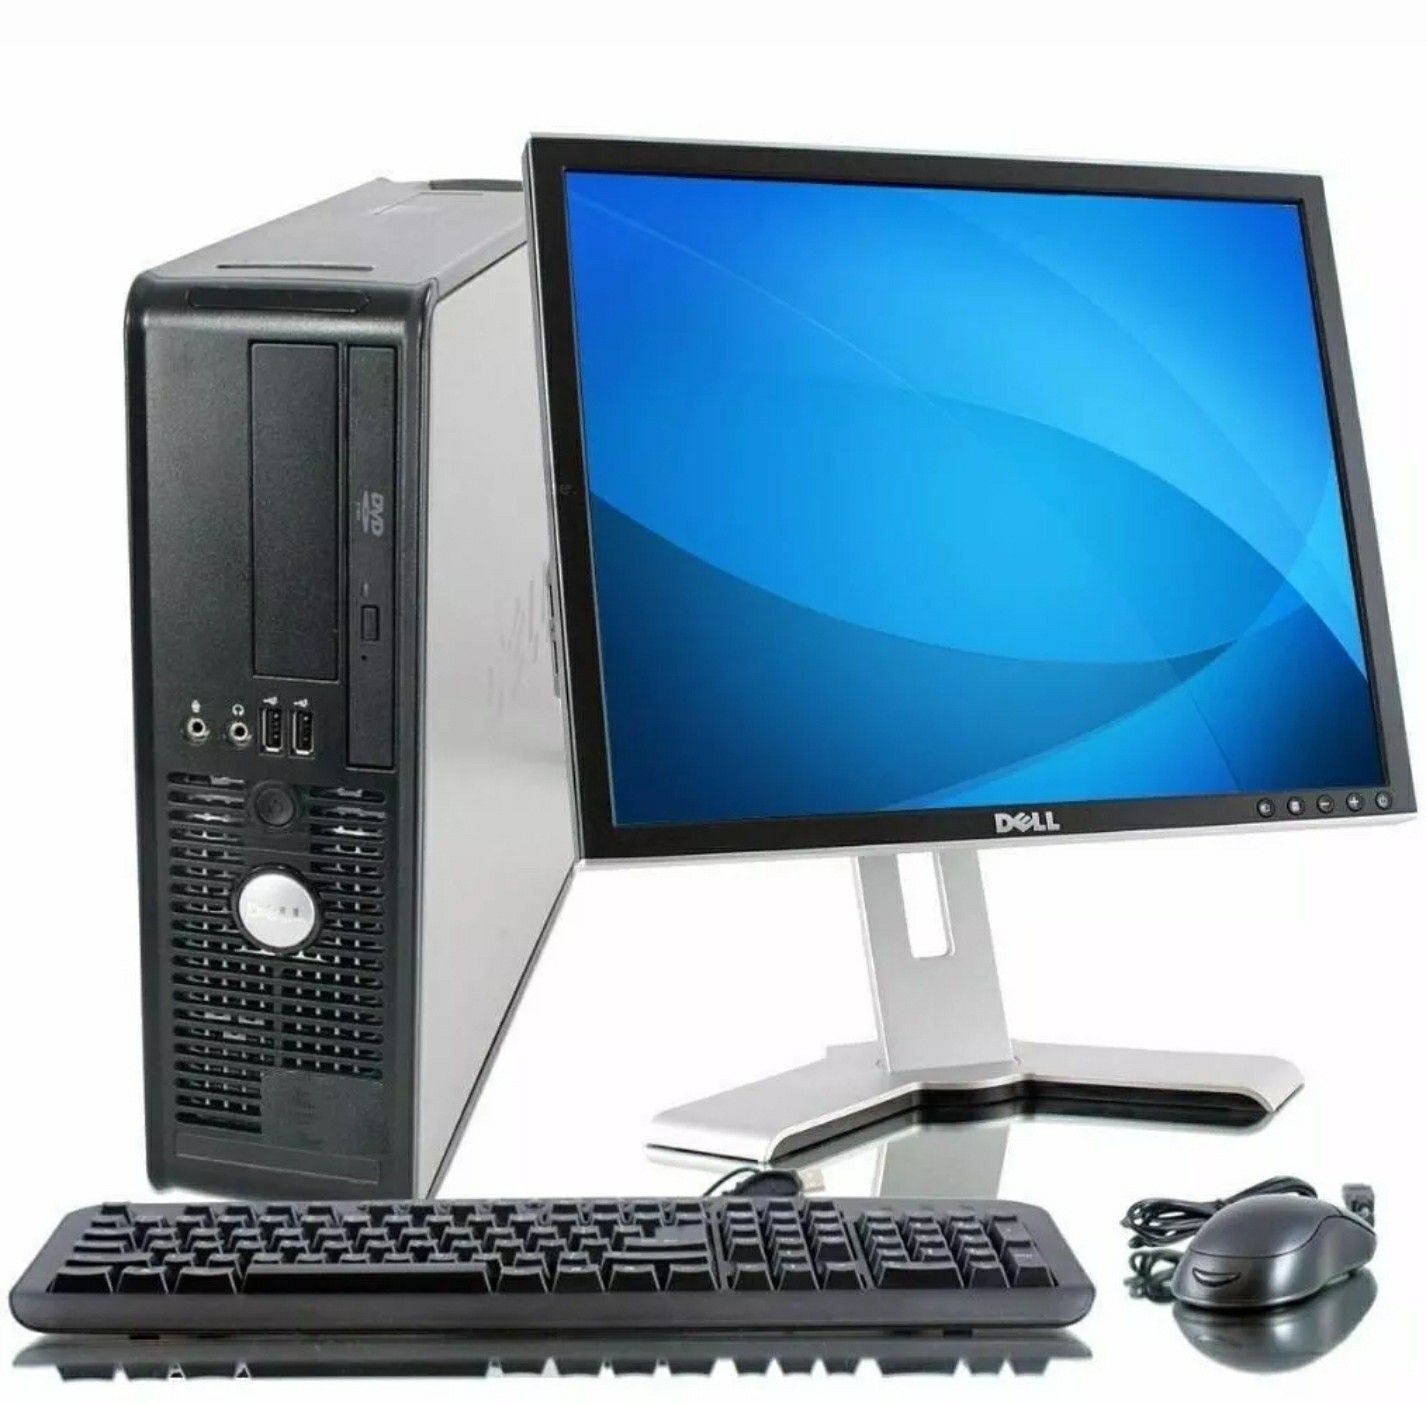 Choose your parts - WiFi Desktop PC Computer With Monitor Bundle - Mouse Keyboard